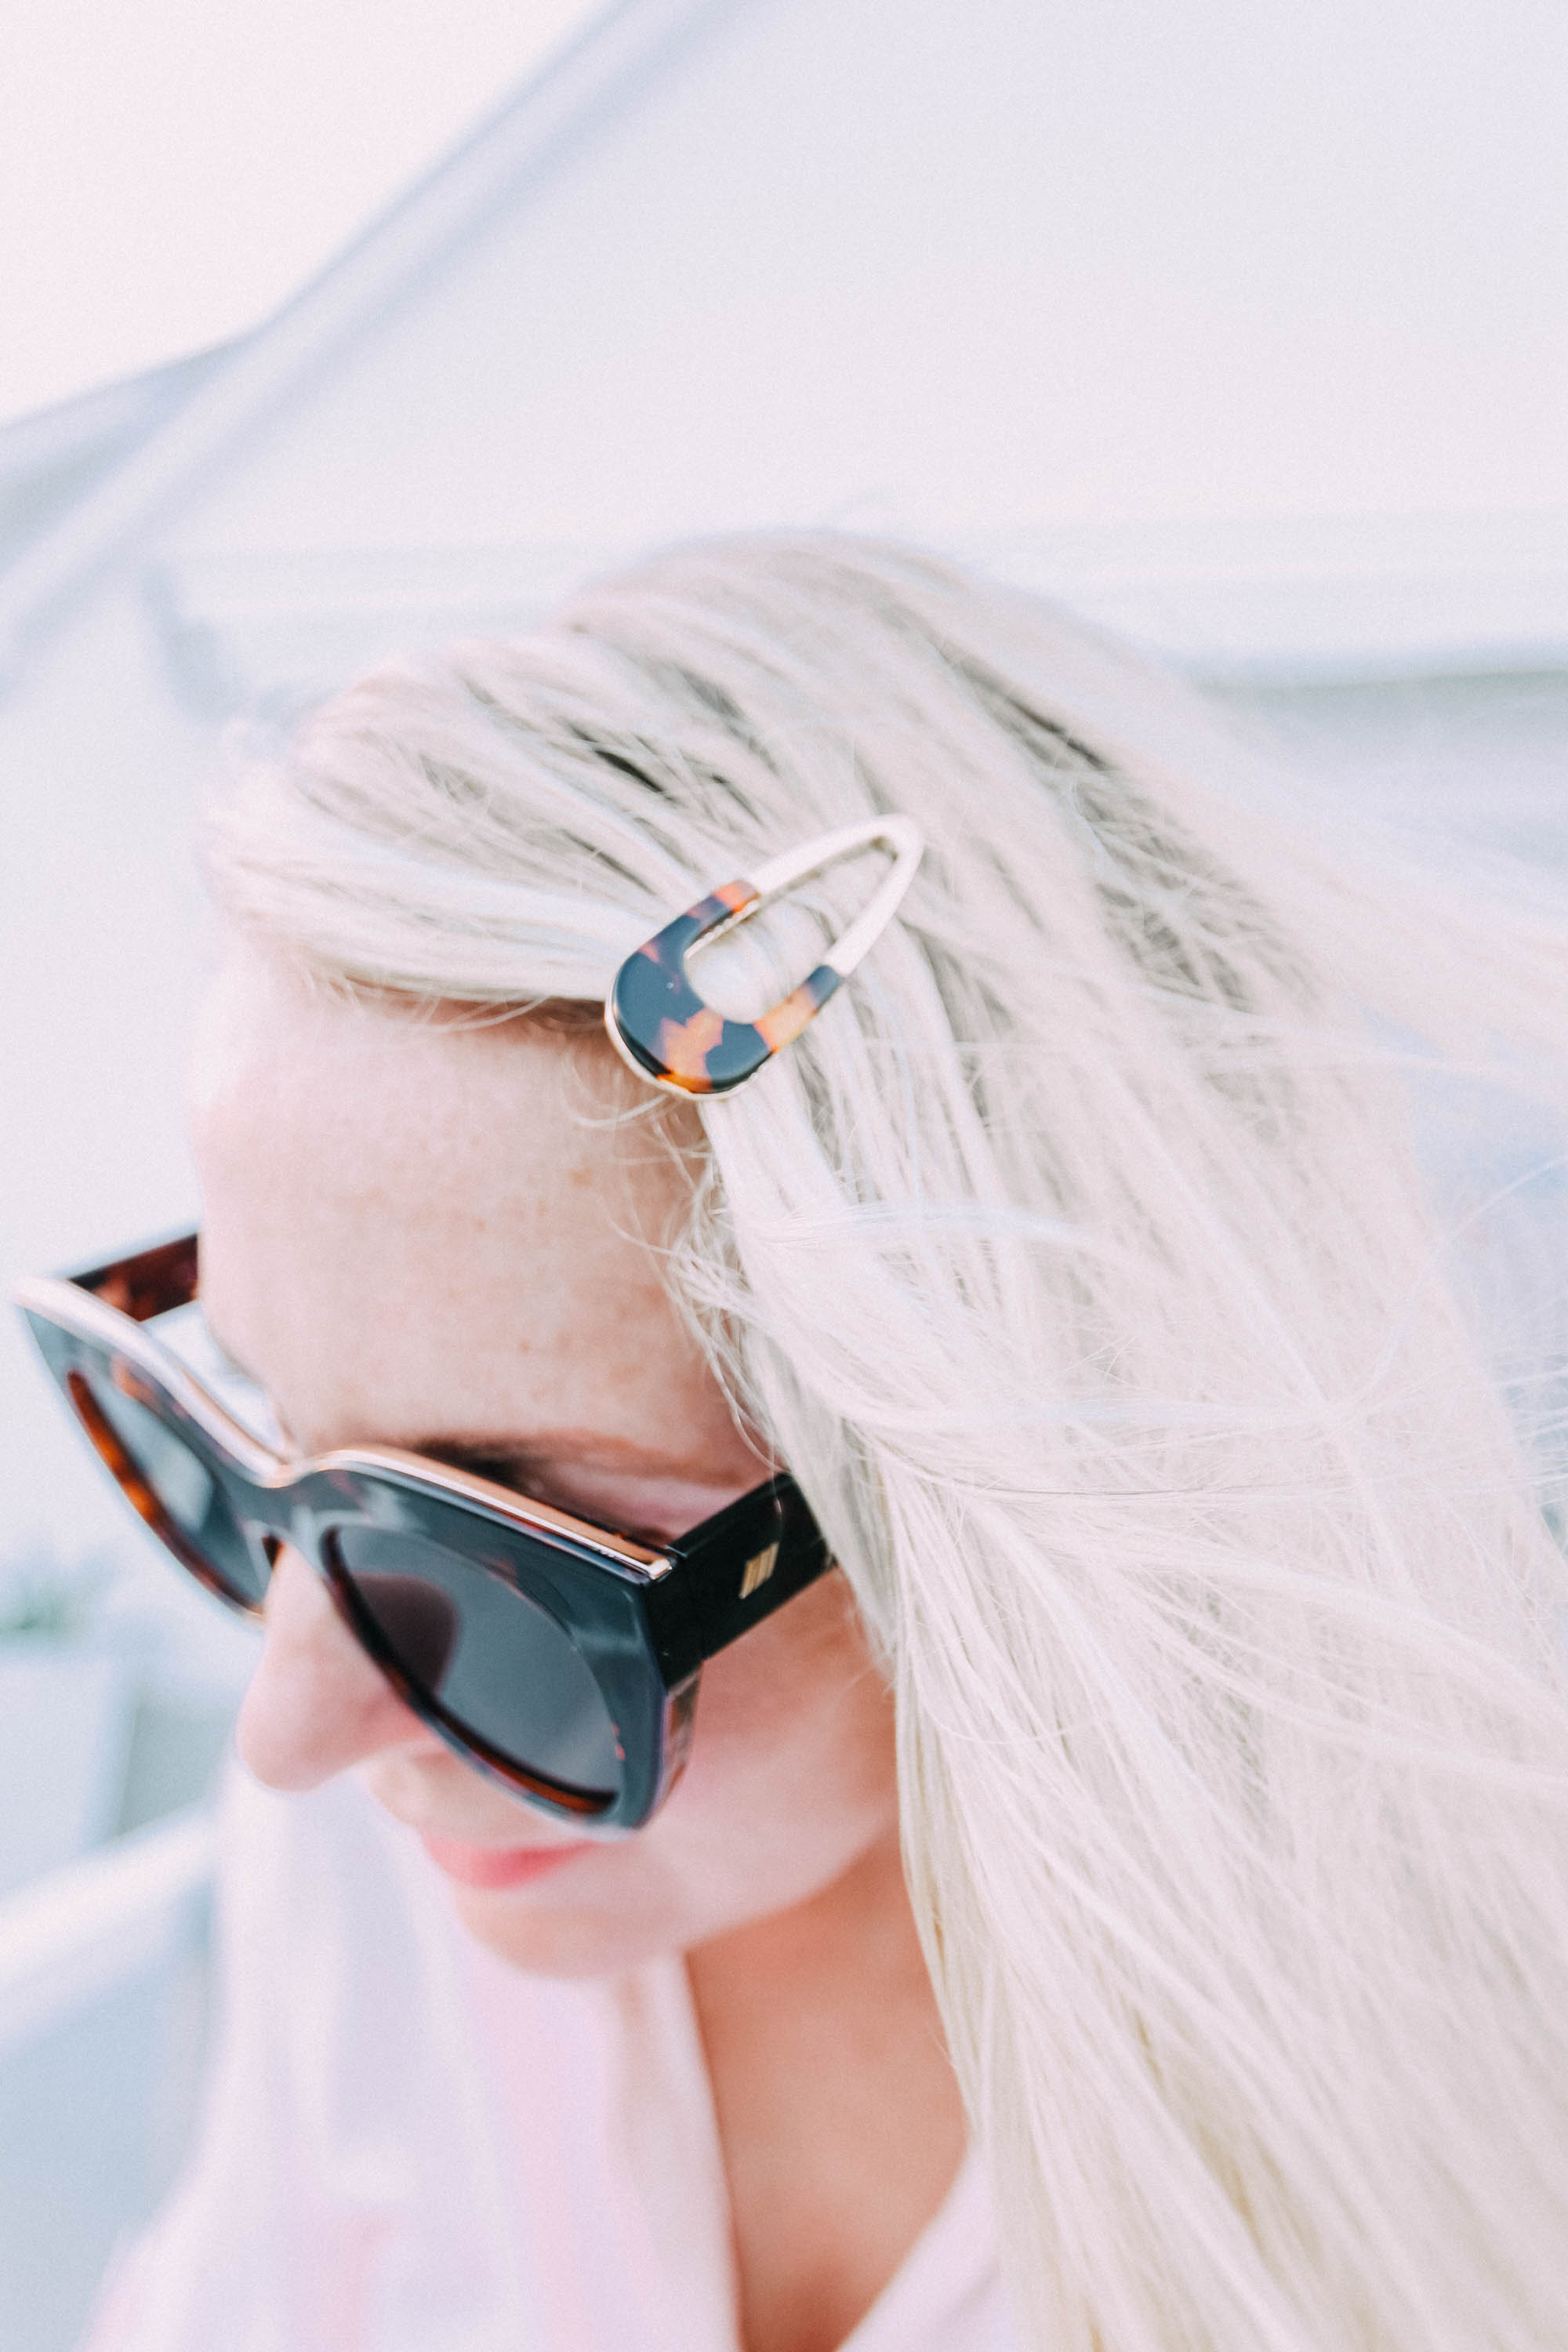 Hair Accessories, Fashion blogger Erin Busbee of BusbeeStyle.com wearing a tortoise and gold hair clip at the beach in Florida